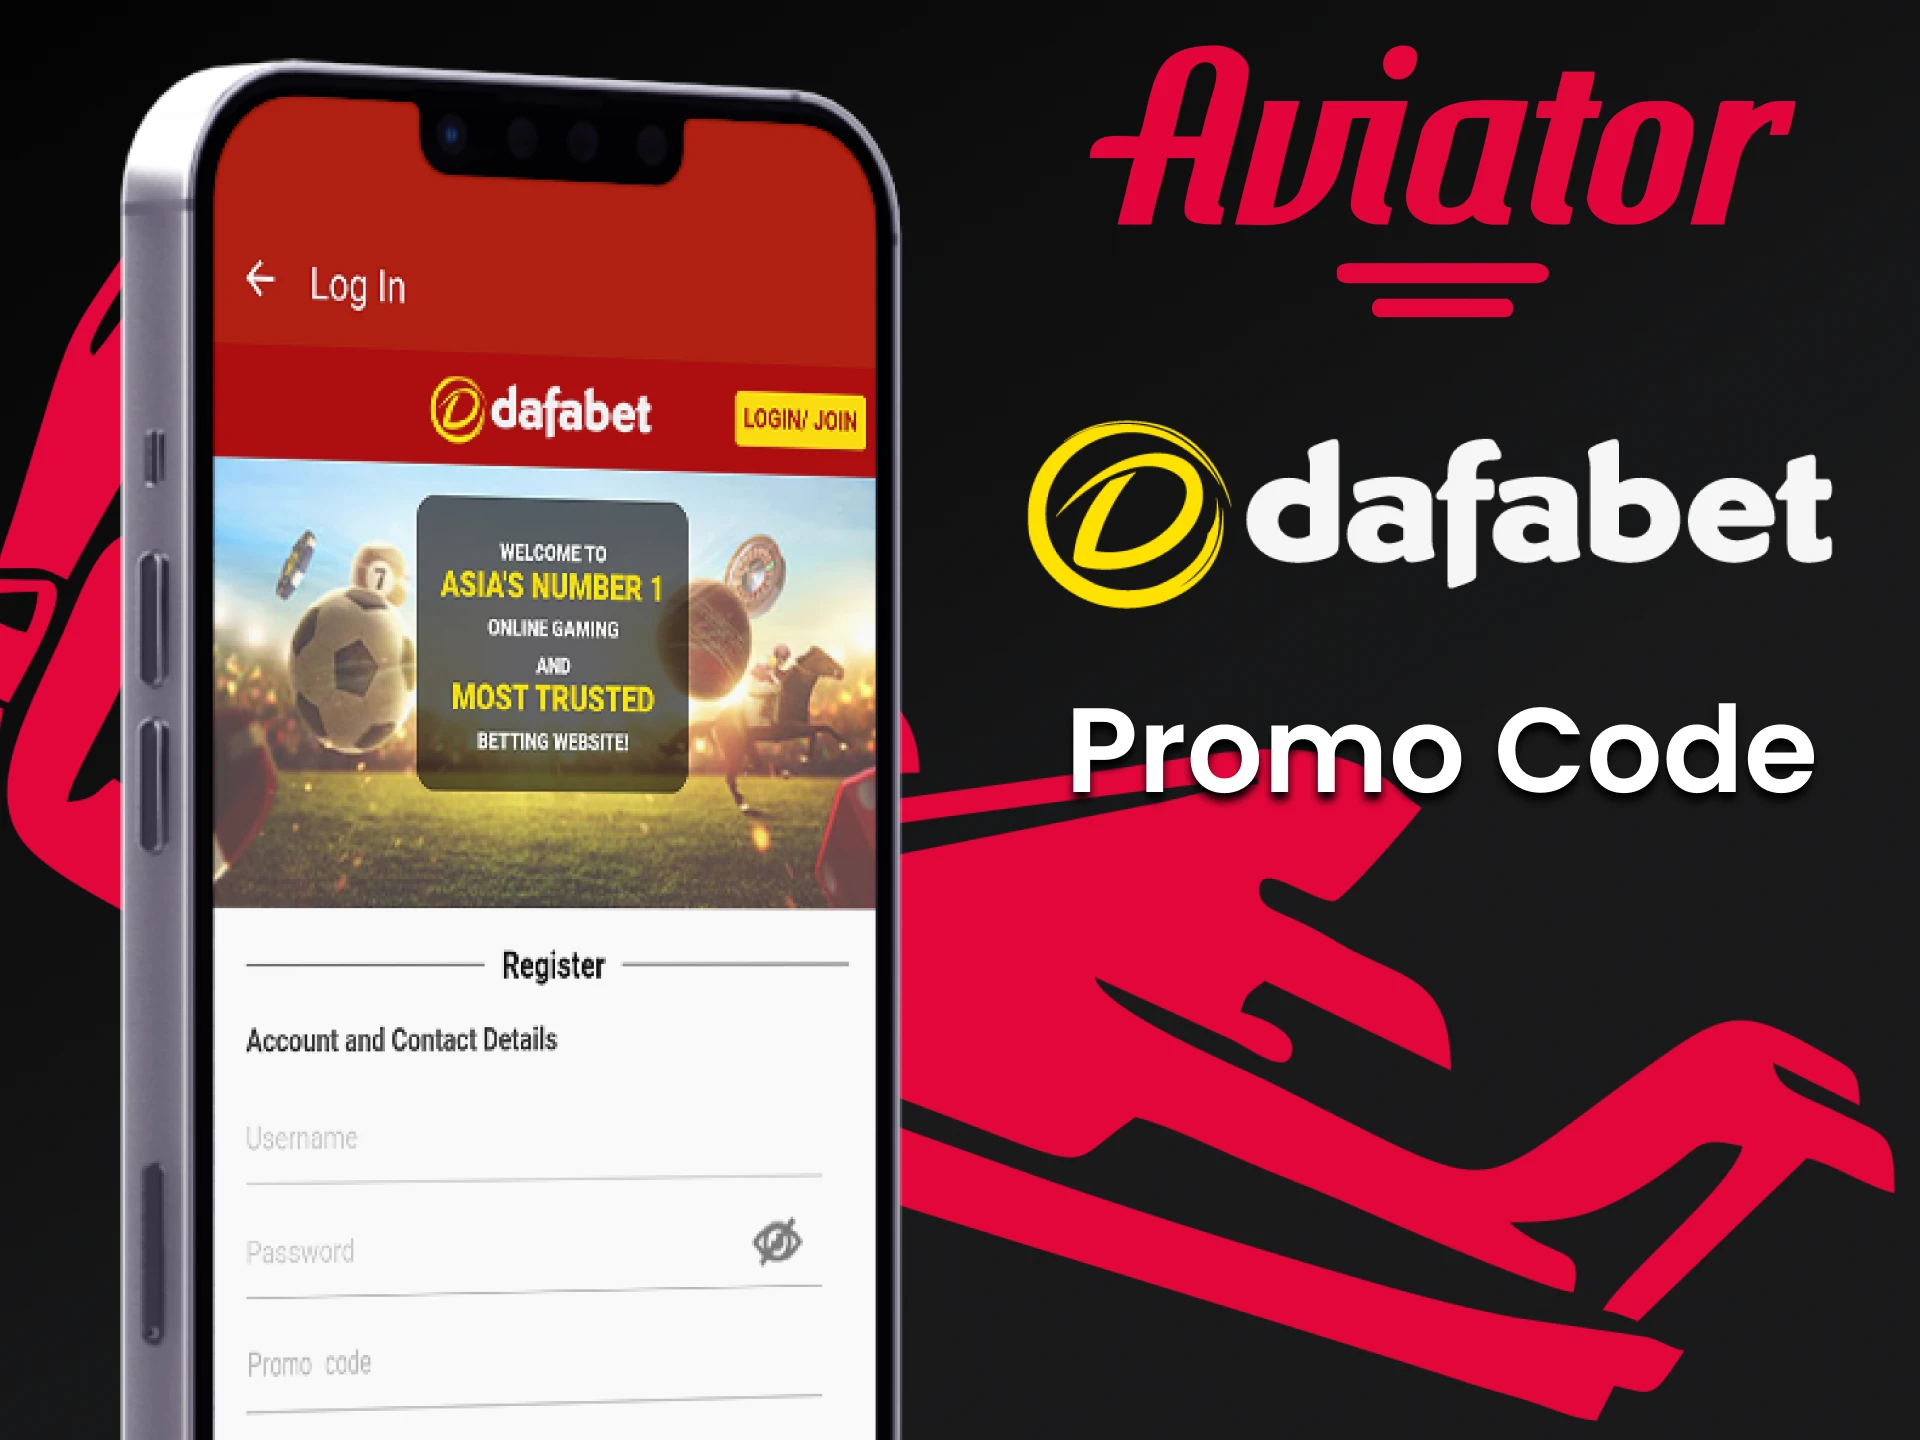 Find a promo code from Dafabet to get a bonus in the game Aviator.